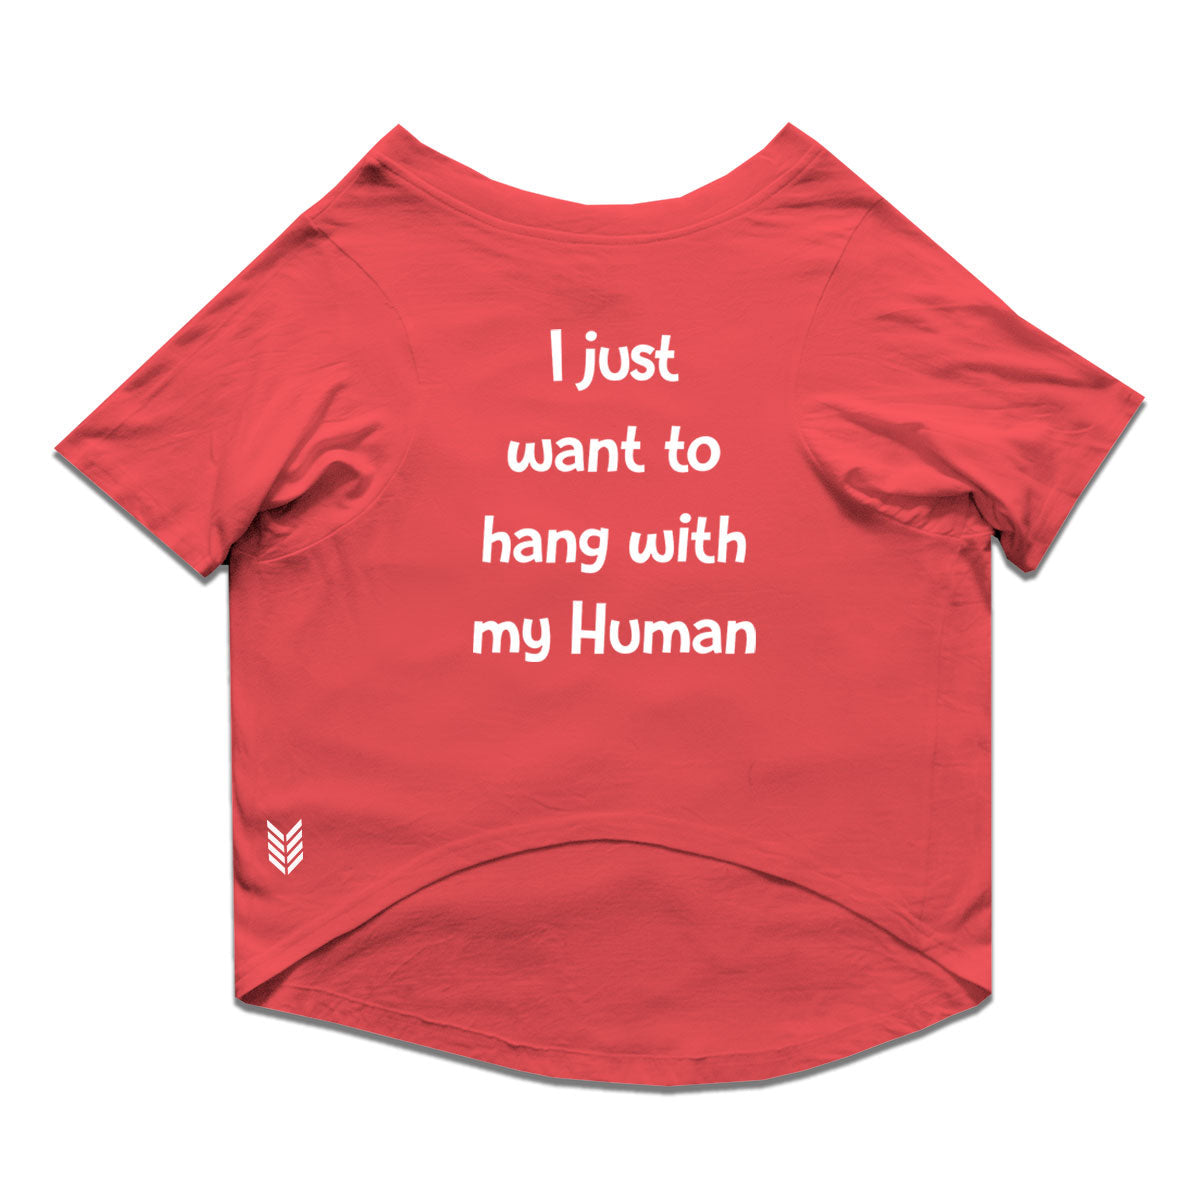 Ruse / i-just-want-to-hang-with-my-human-crew-neck-dog-tee / Poppy Red